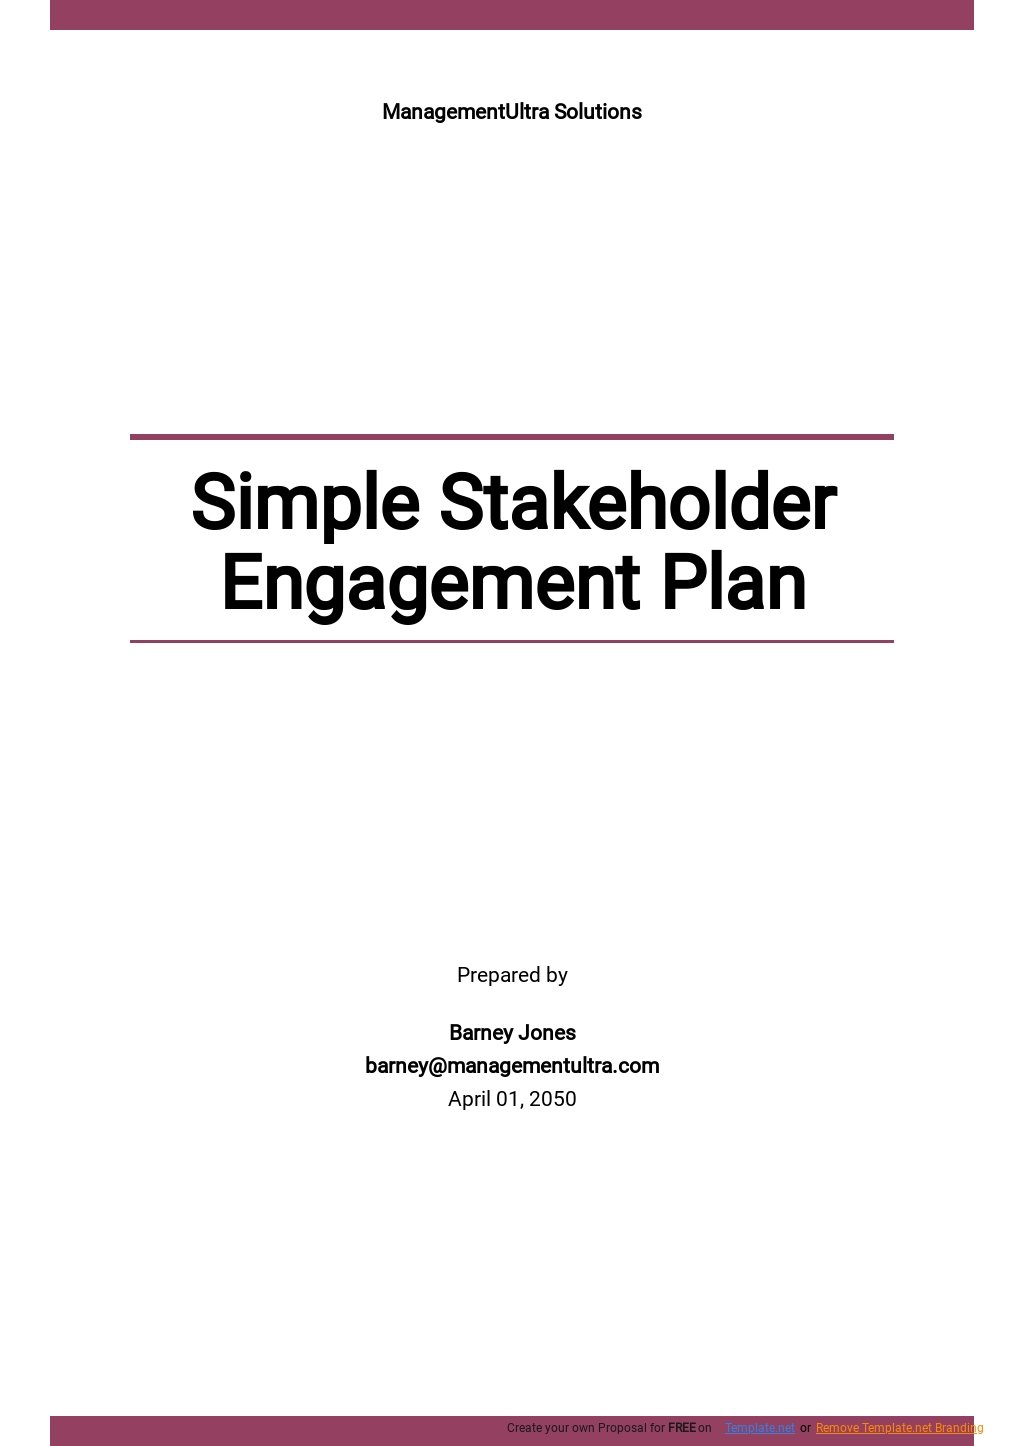 Free Simple Stakeholder Engagement Plan Template